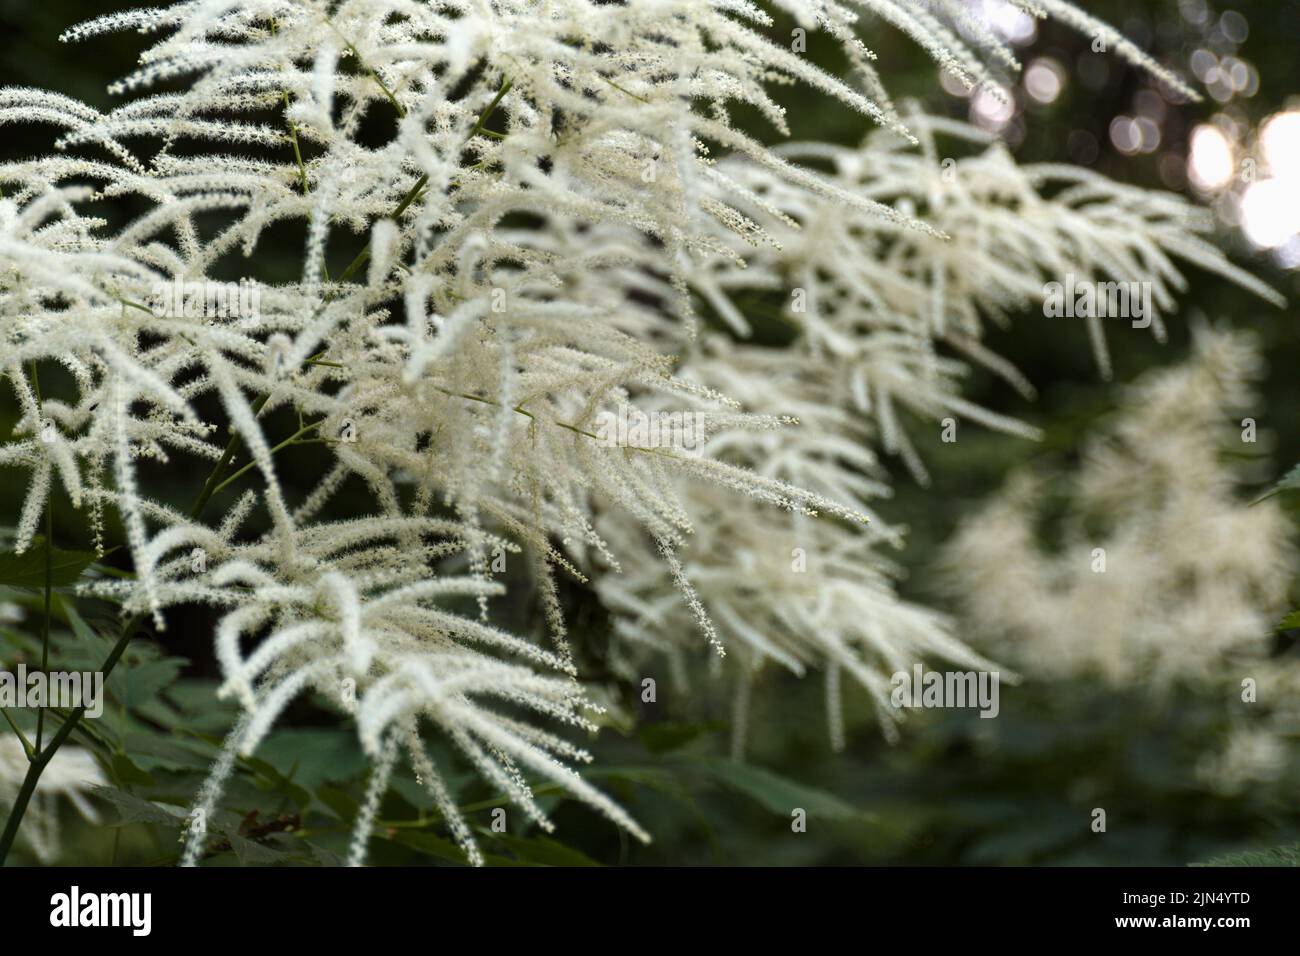 Aruncus dioicus, known as goat's beard, buck's-beard or bride's feathers, a flowering herbaceous perennial plant Stock Photo